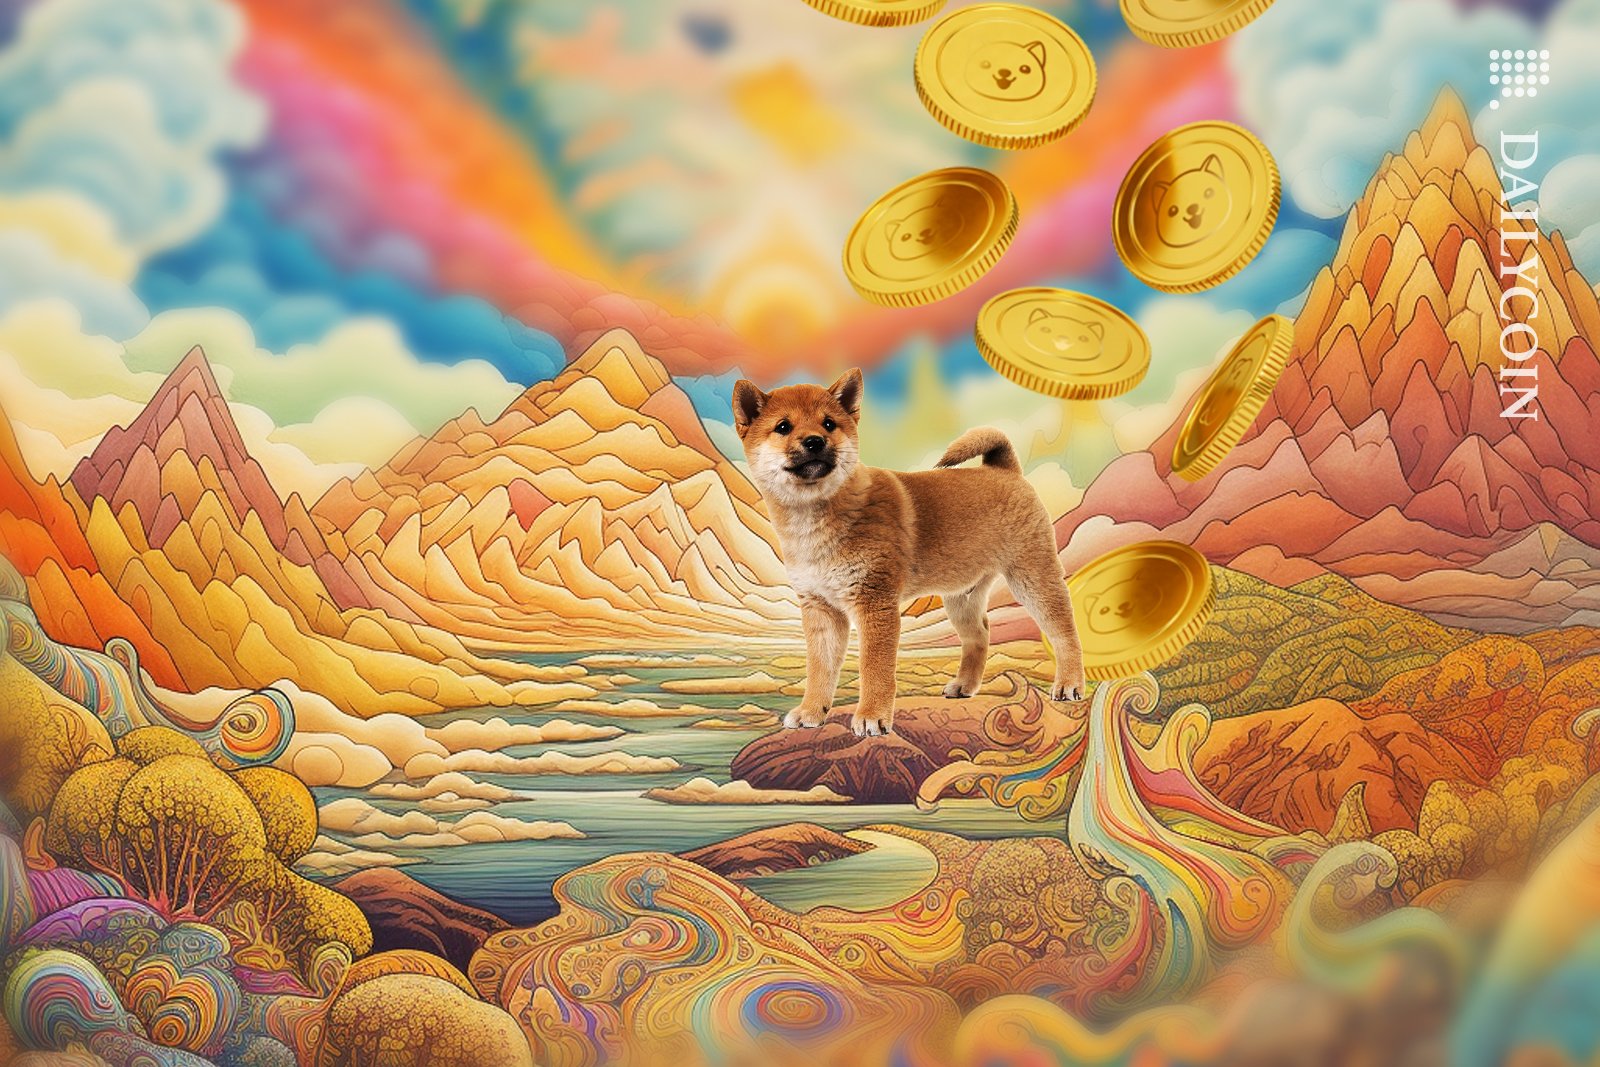 Baby Shiba Inu in trippy pyramid land surrounded by floating Baby Doge coins.